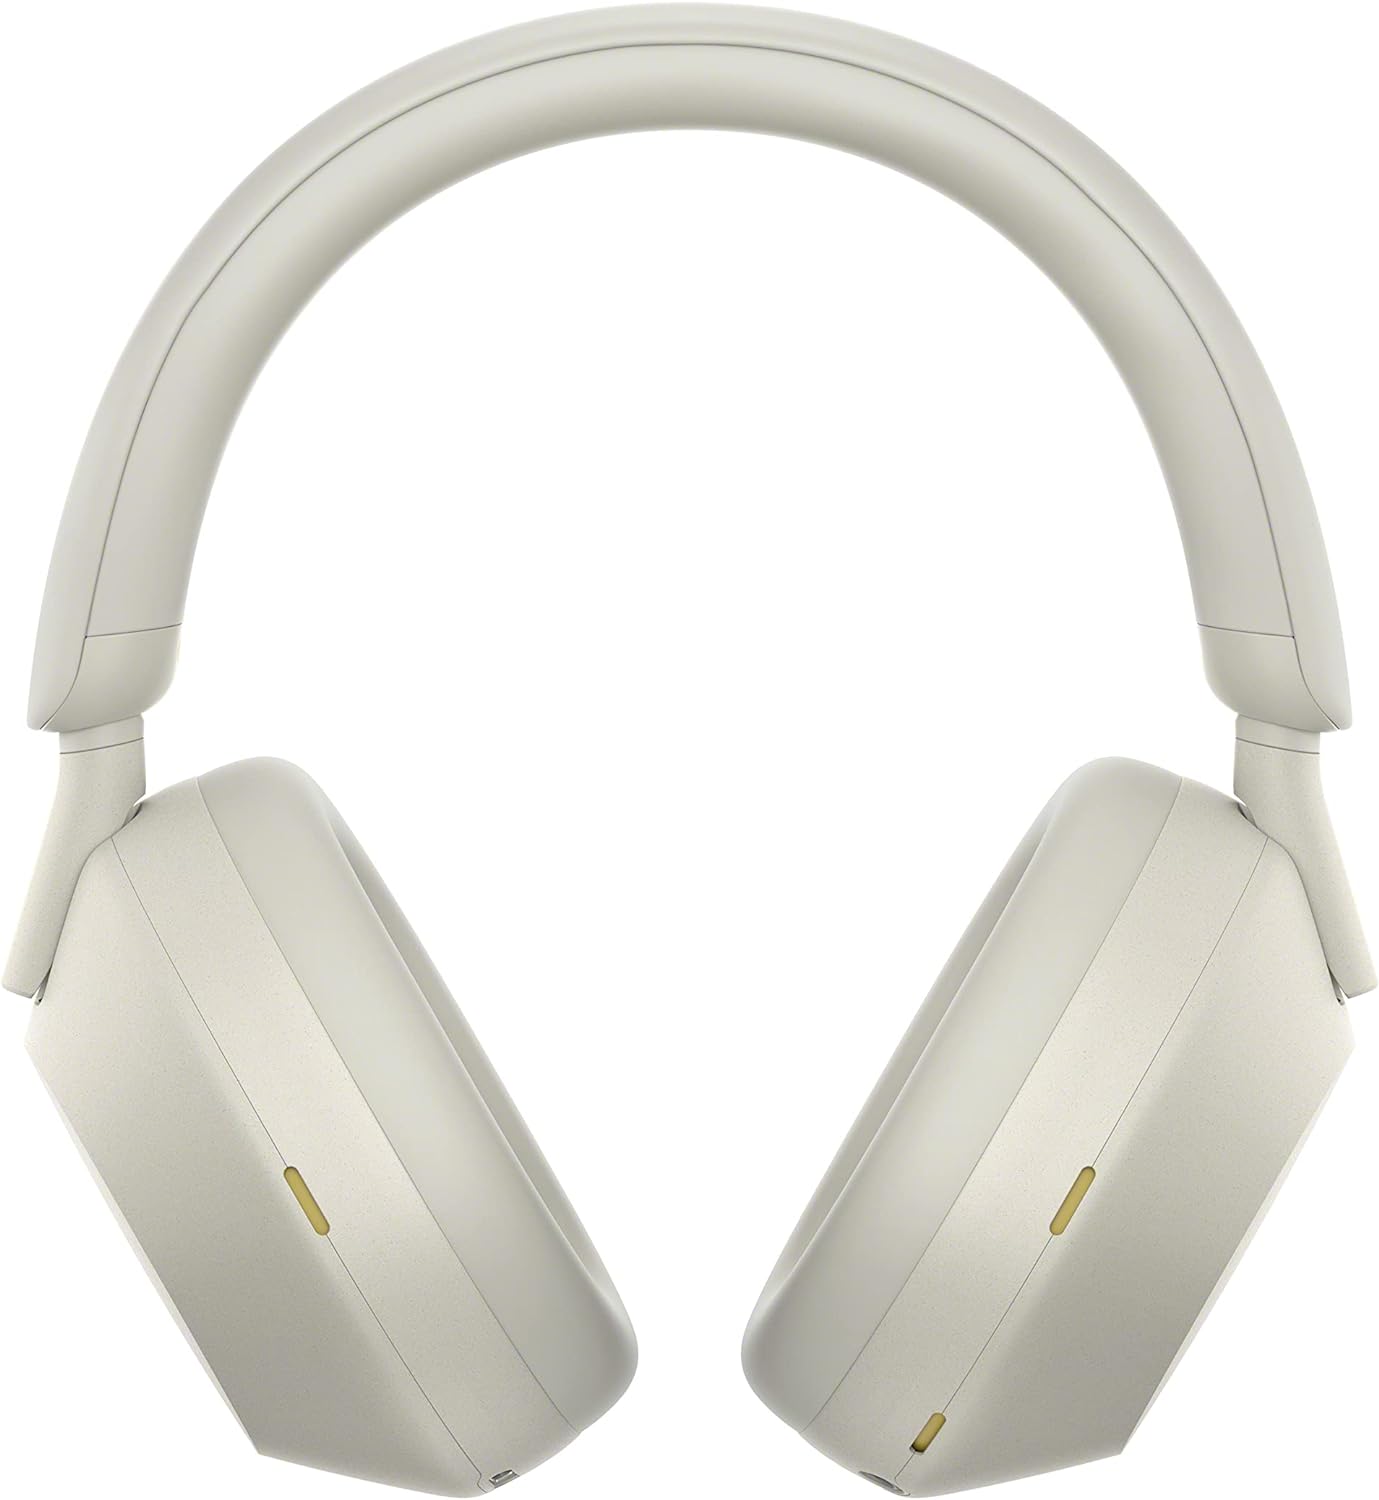 Sony WH-1000XM5 Wireless Noise Canceling Bluetooth Headphones with Alexa Control - Silver